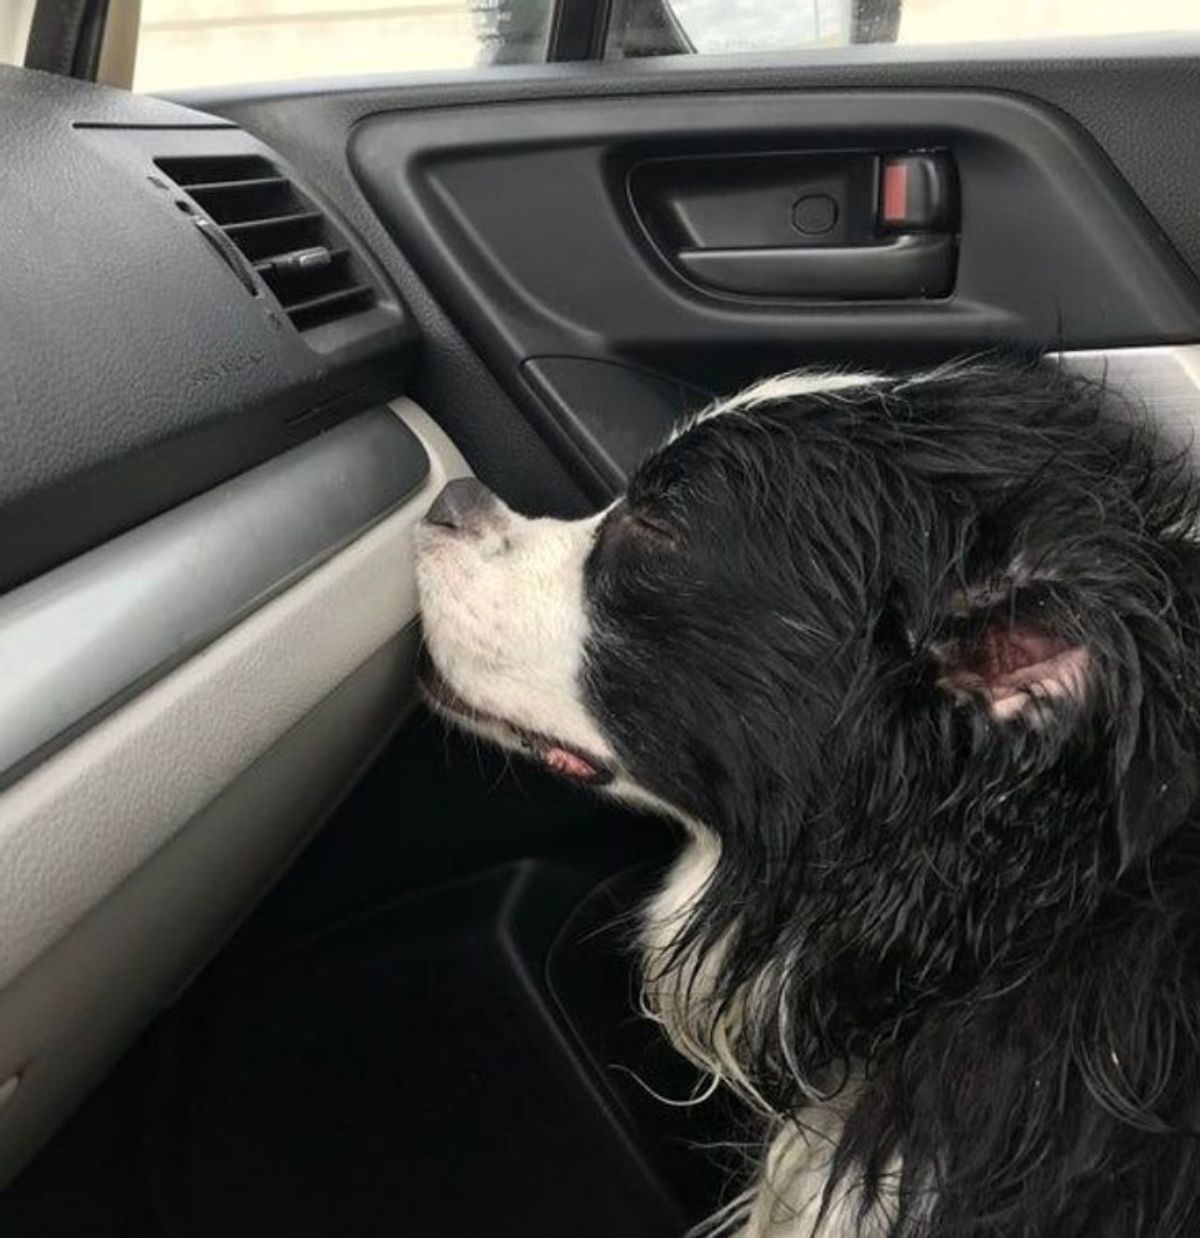 black and white dog sleeping sitting upright with the nose smushed against the dashboard